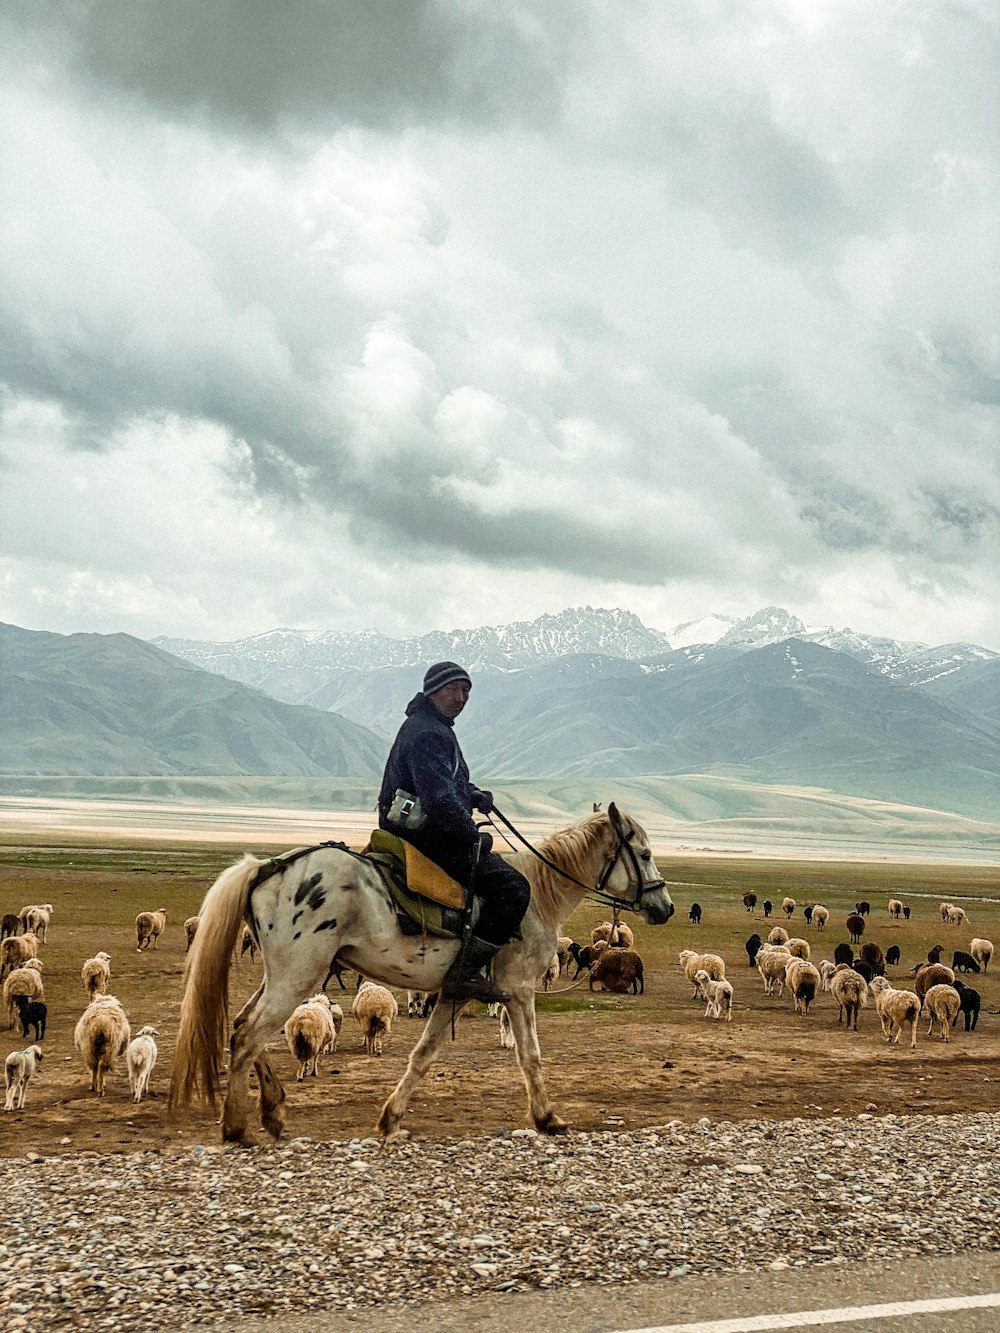 a man riding a horse in front of a herd of sheep